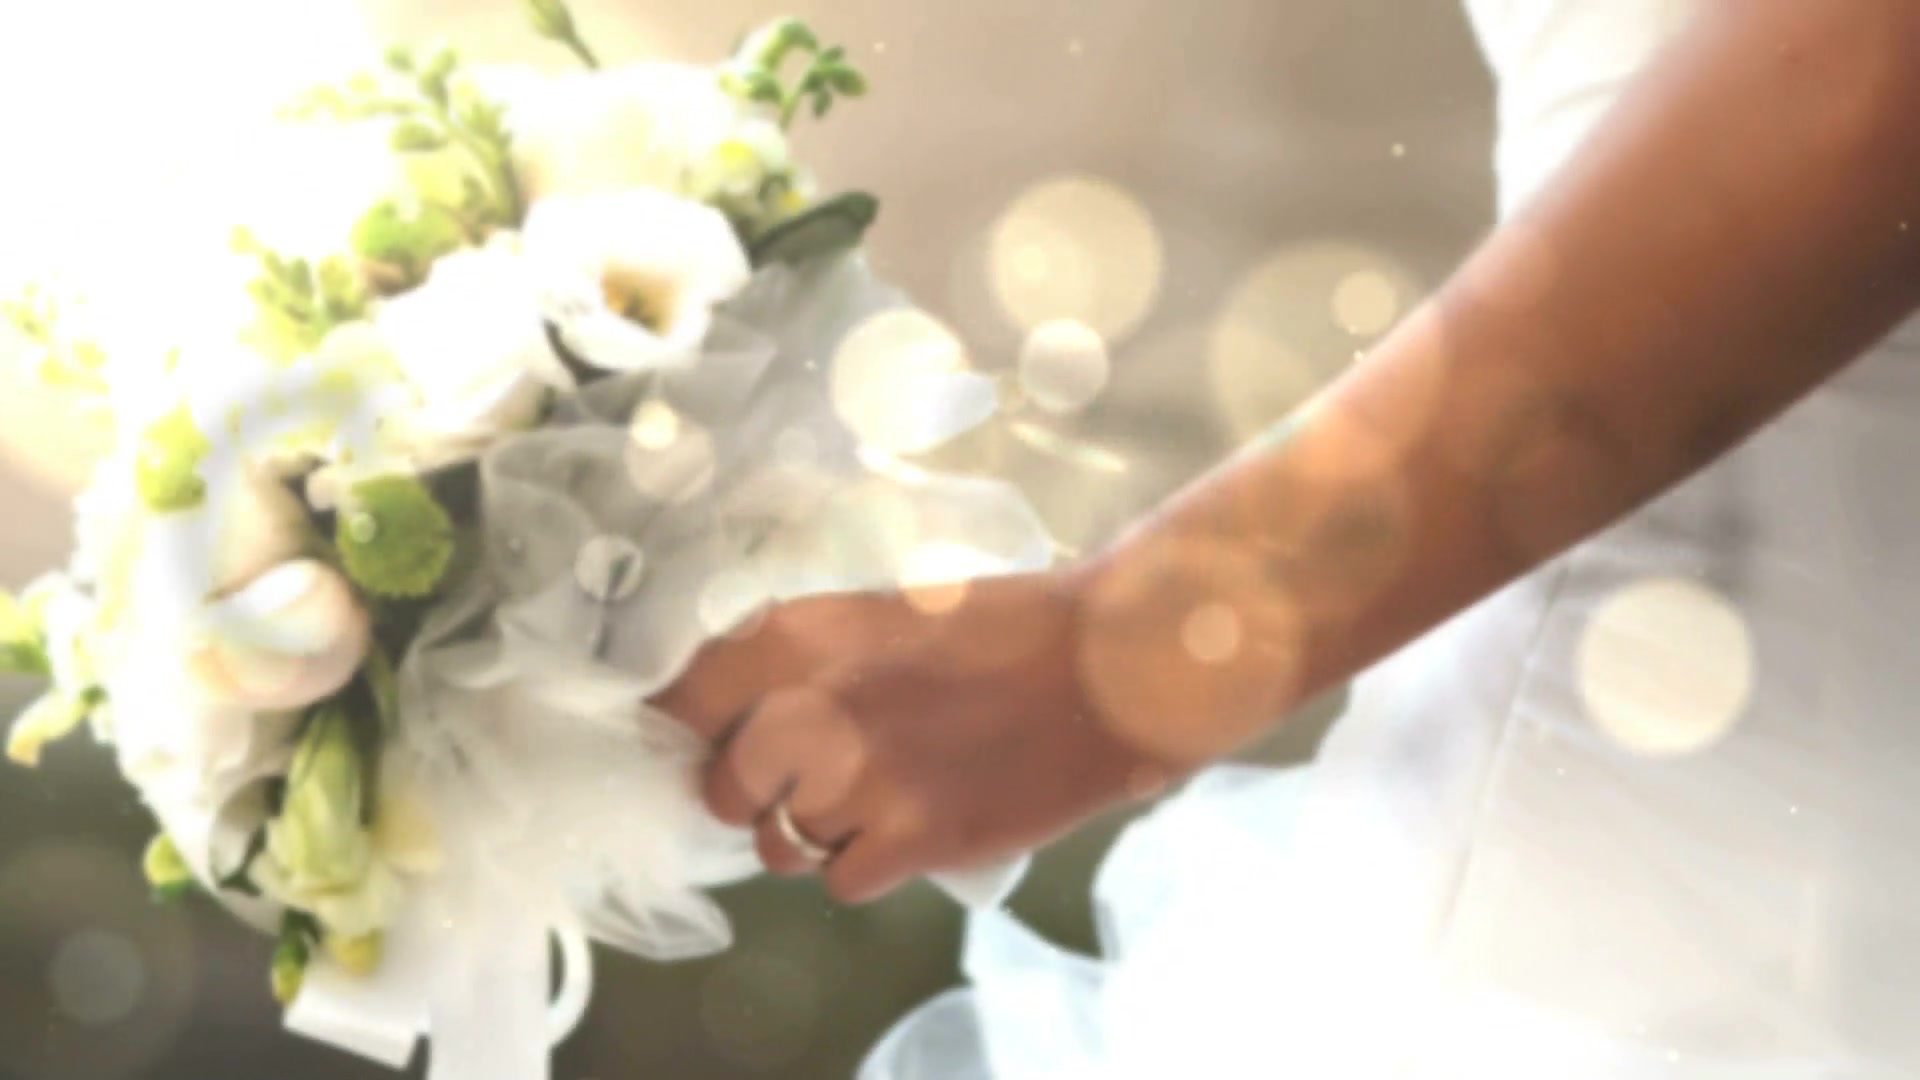 Eternal Moment Wedding - Download Videohive 7647167